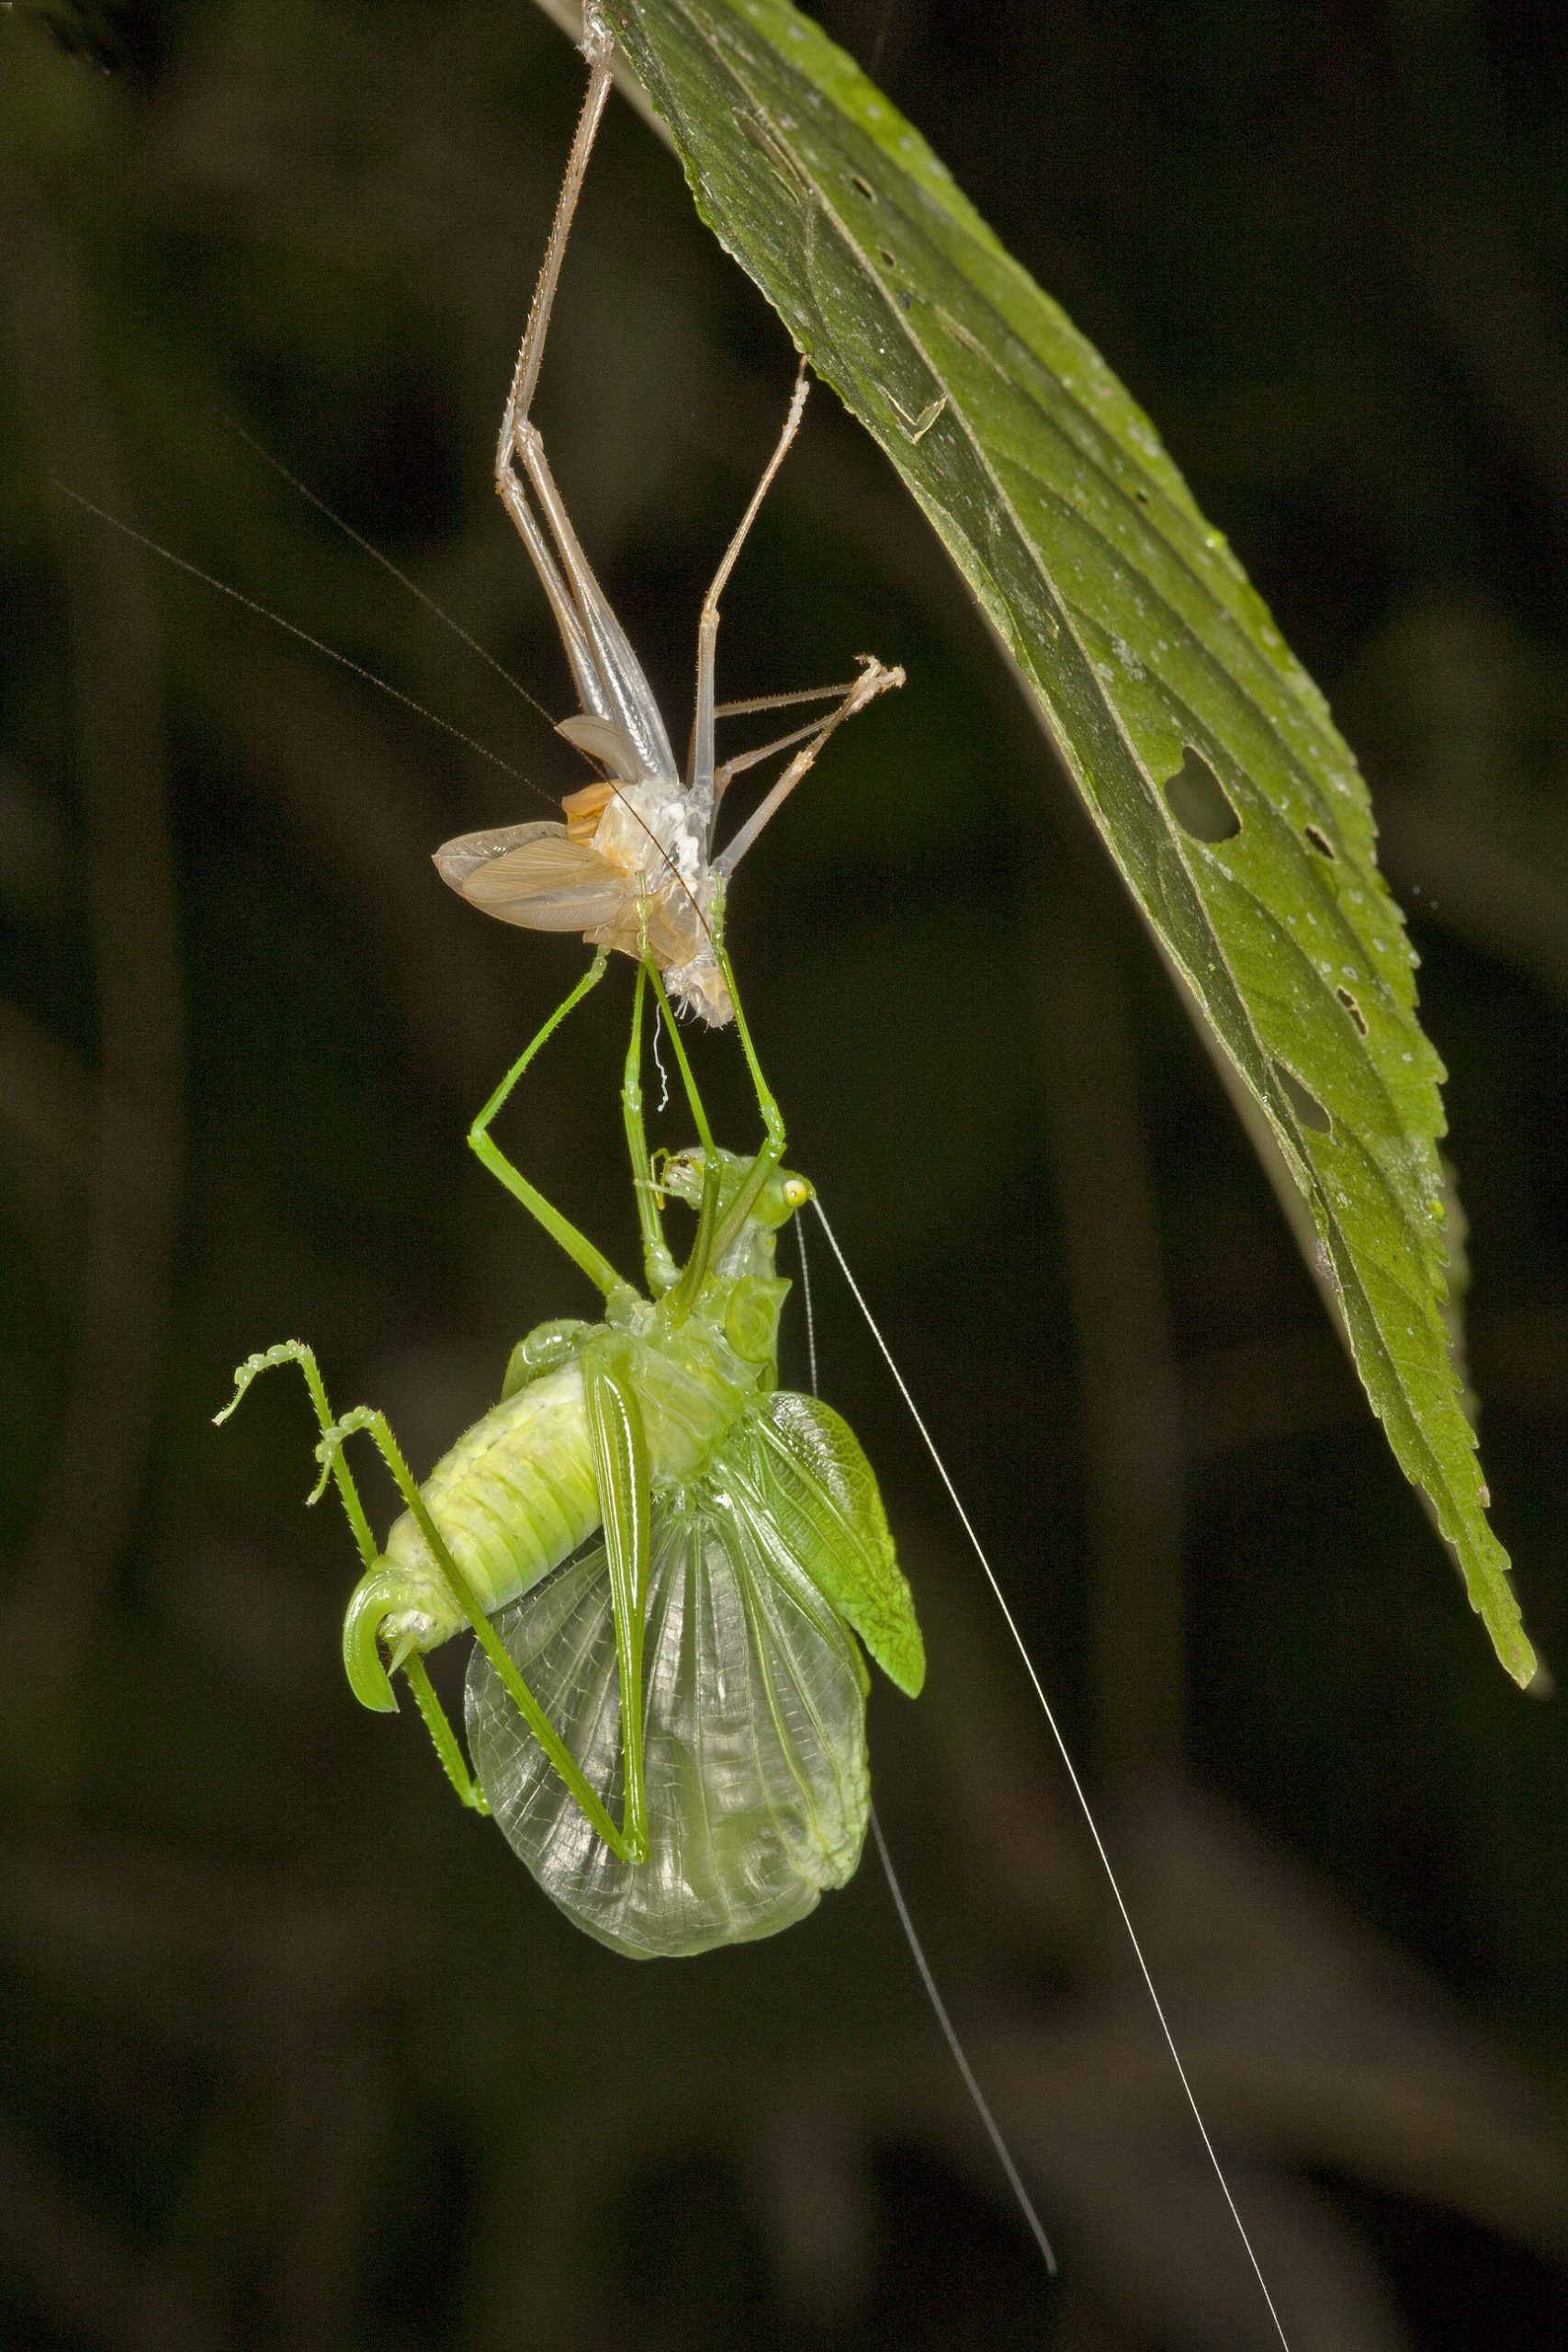 A katydid completes its moult in the Amazonian rainforest. Claire Waring photographed this night-time emergence in the early hours of the morning when she was on a ‘bug-hunt’ in the forest.